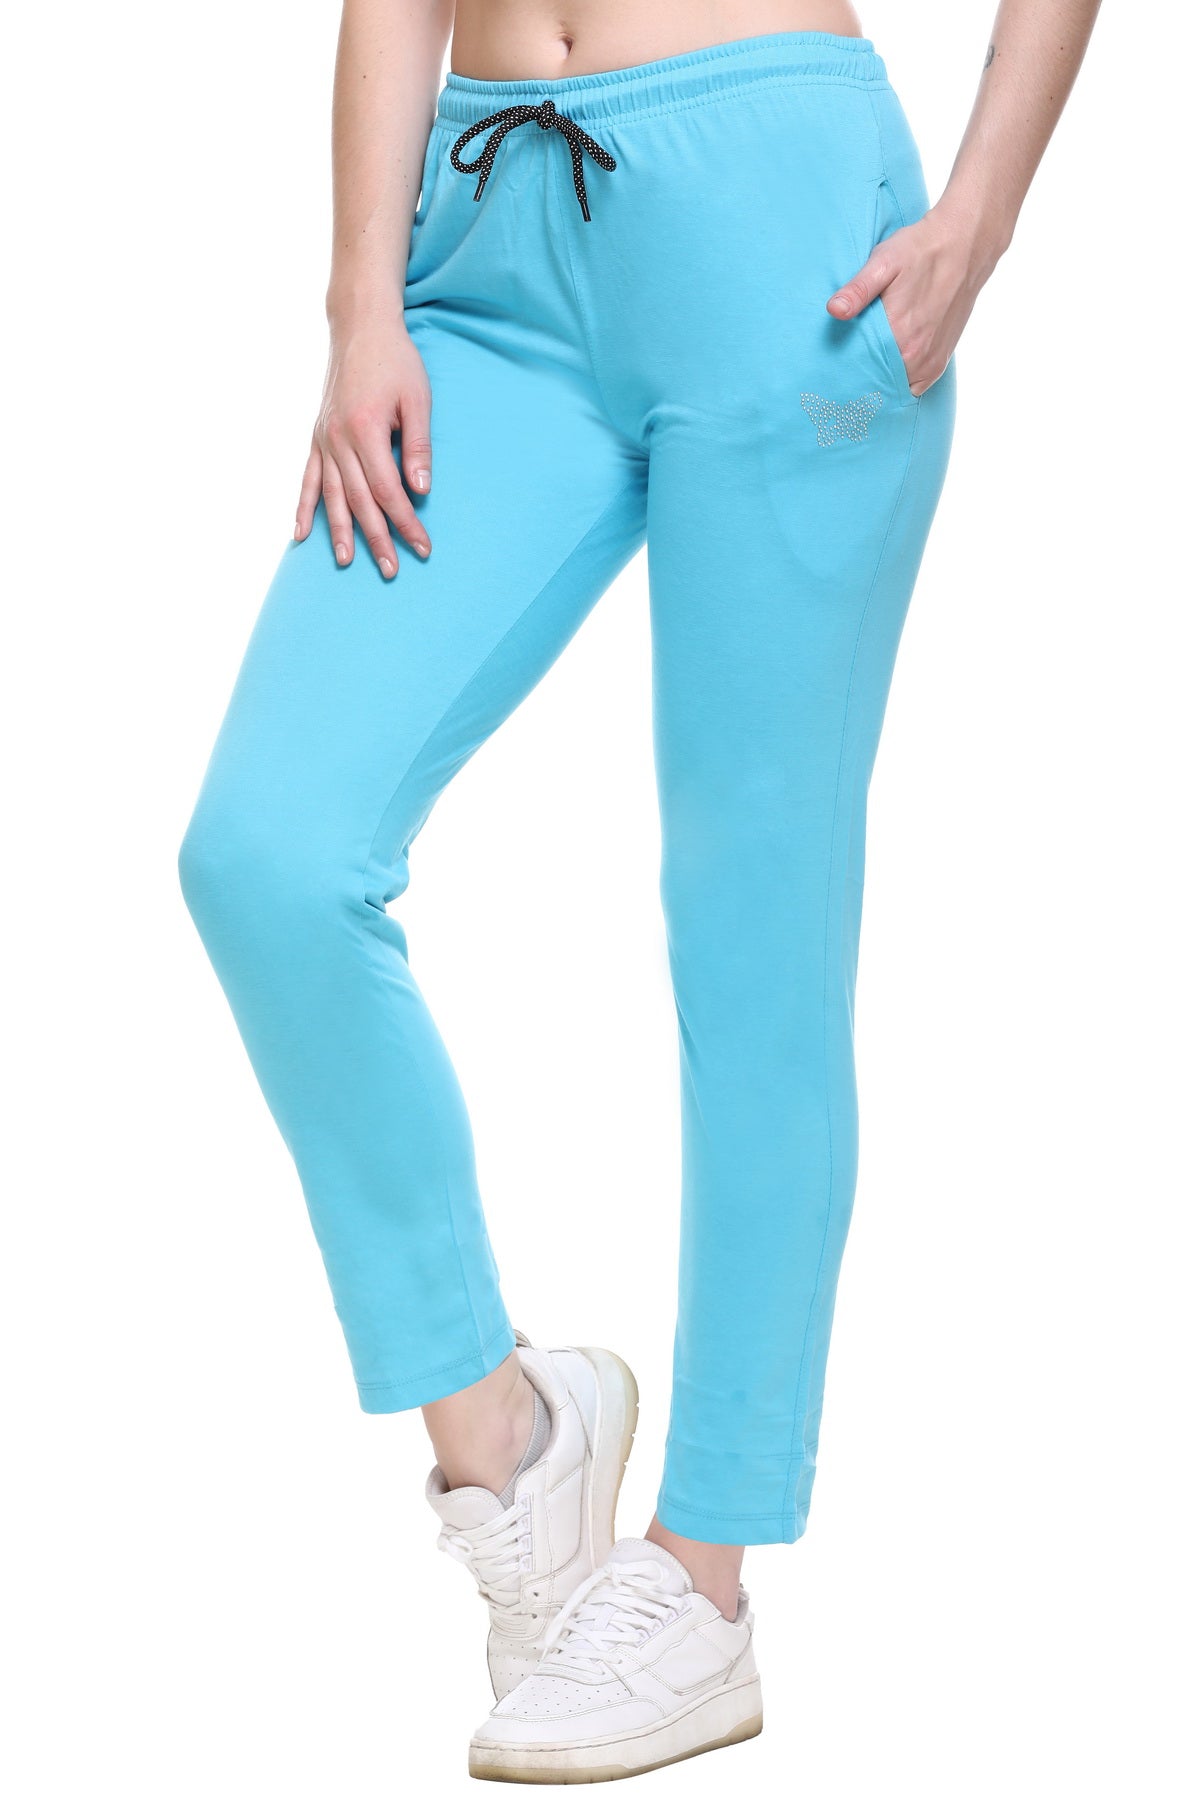 Cotton Pants Womens - Buy Cotton Pants Womens online at Best Prices in  India